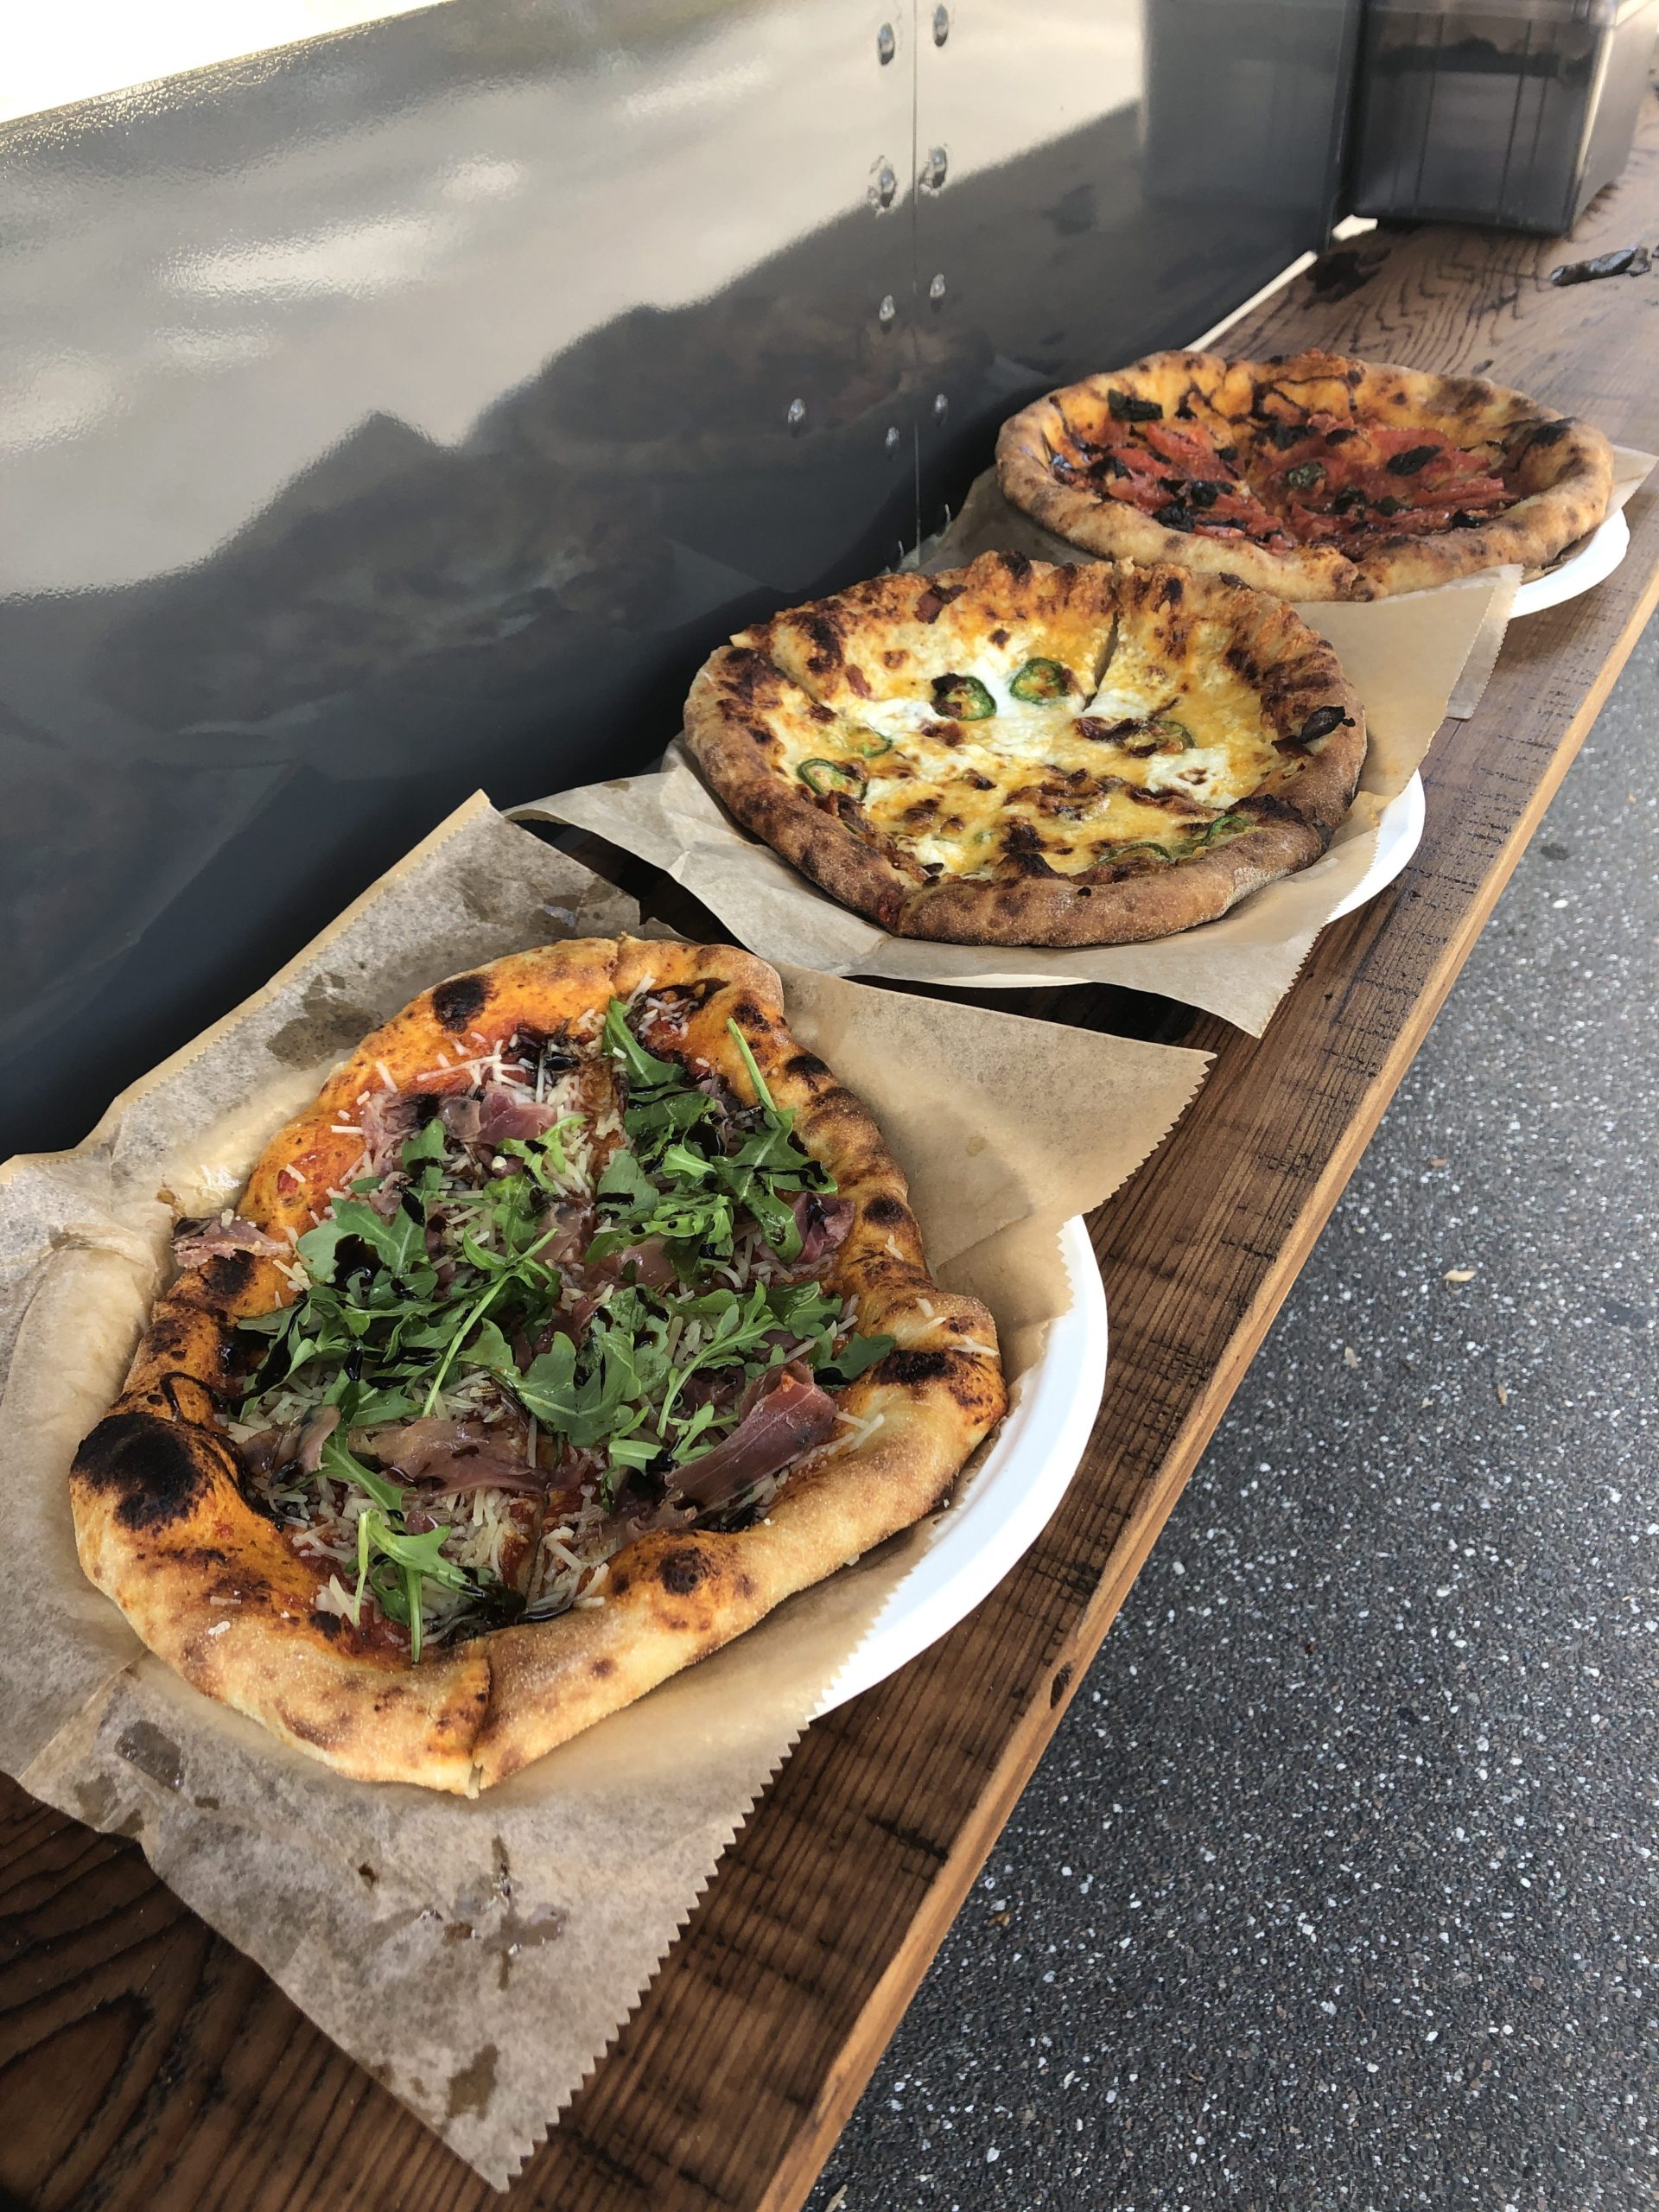 Additional shot of all 3 pizzas on the bar